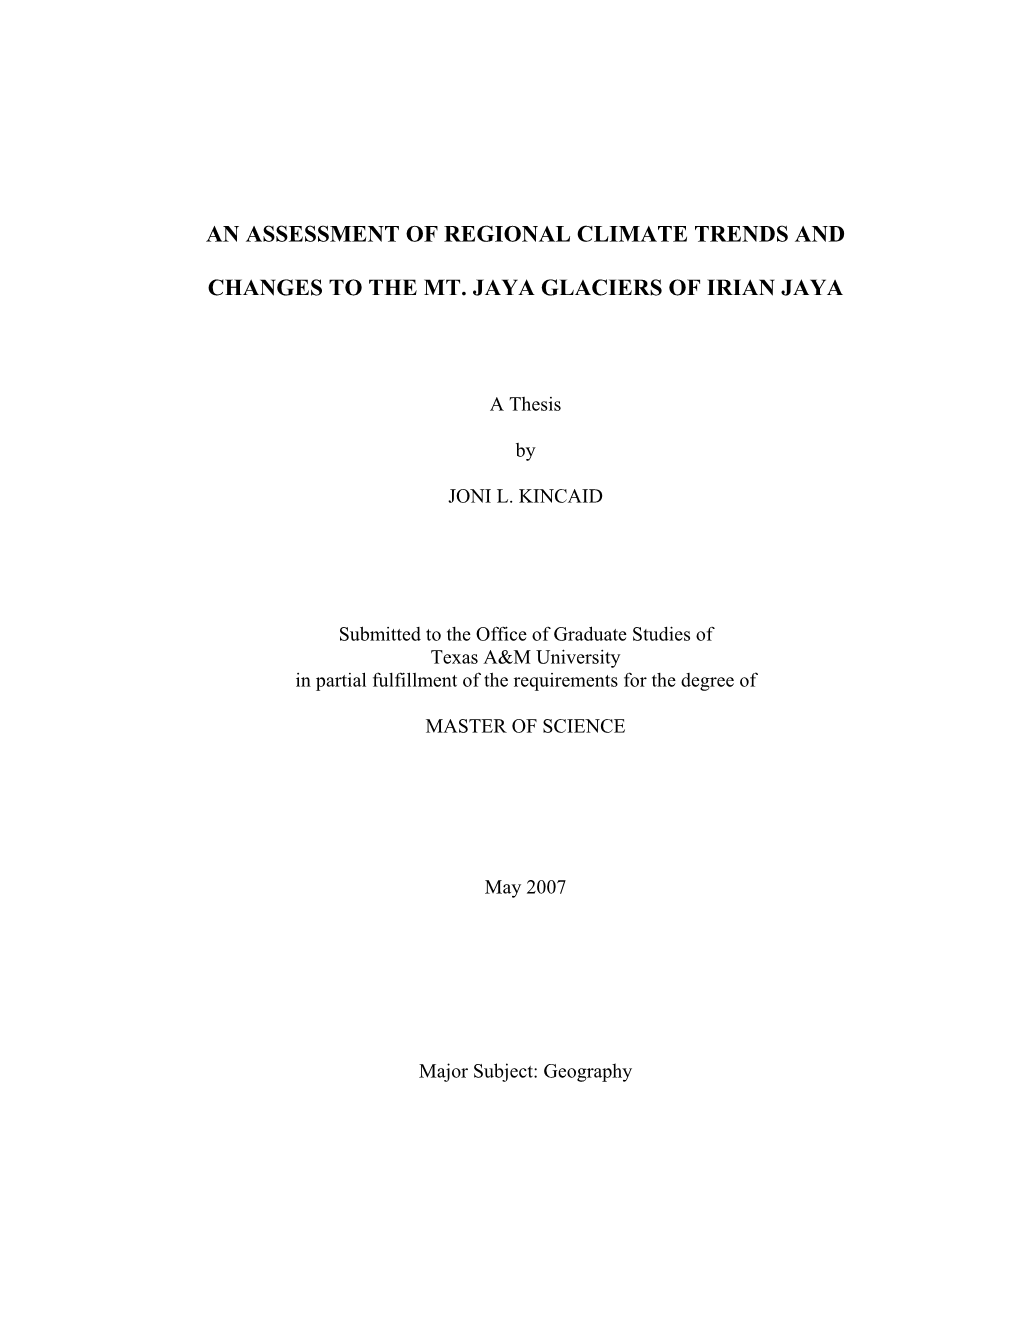 An Assessment of Regional Climate Trends And